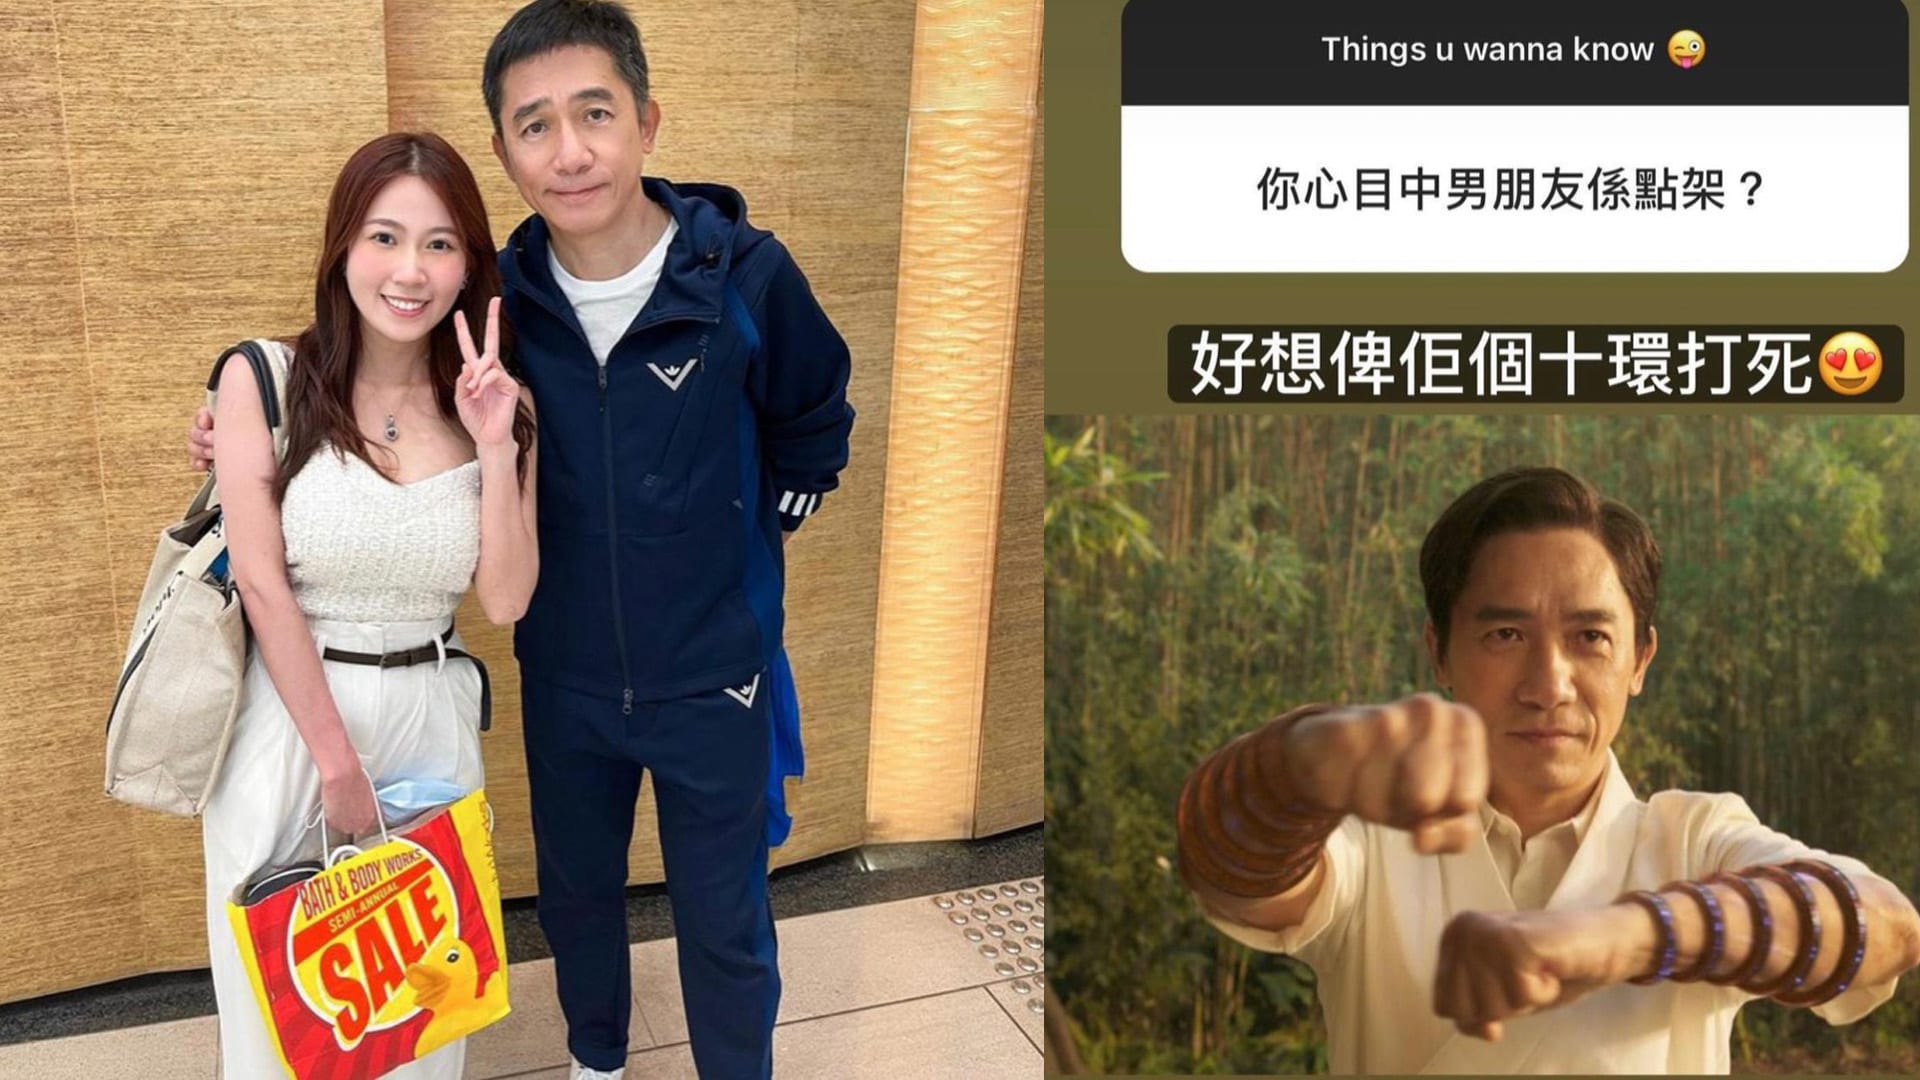 TVB Host Krysella Wong Met Tony Leung On Her Birthday, Says She’s “Not Showering Anymore” After He Touched Her Arm